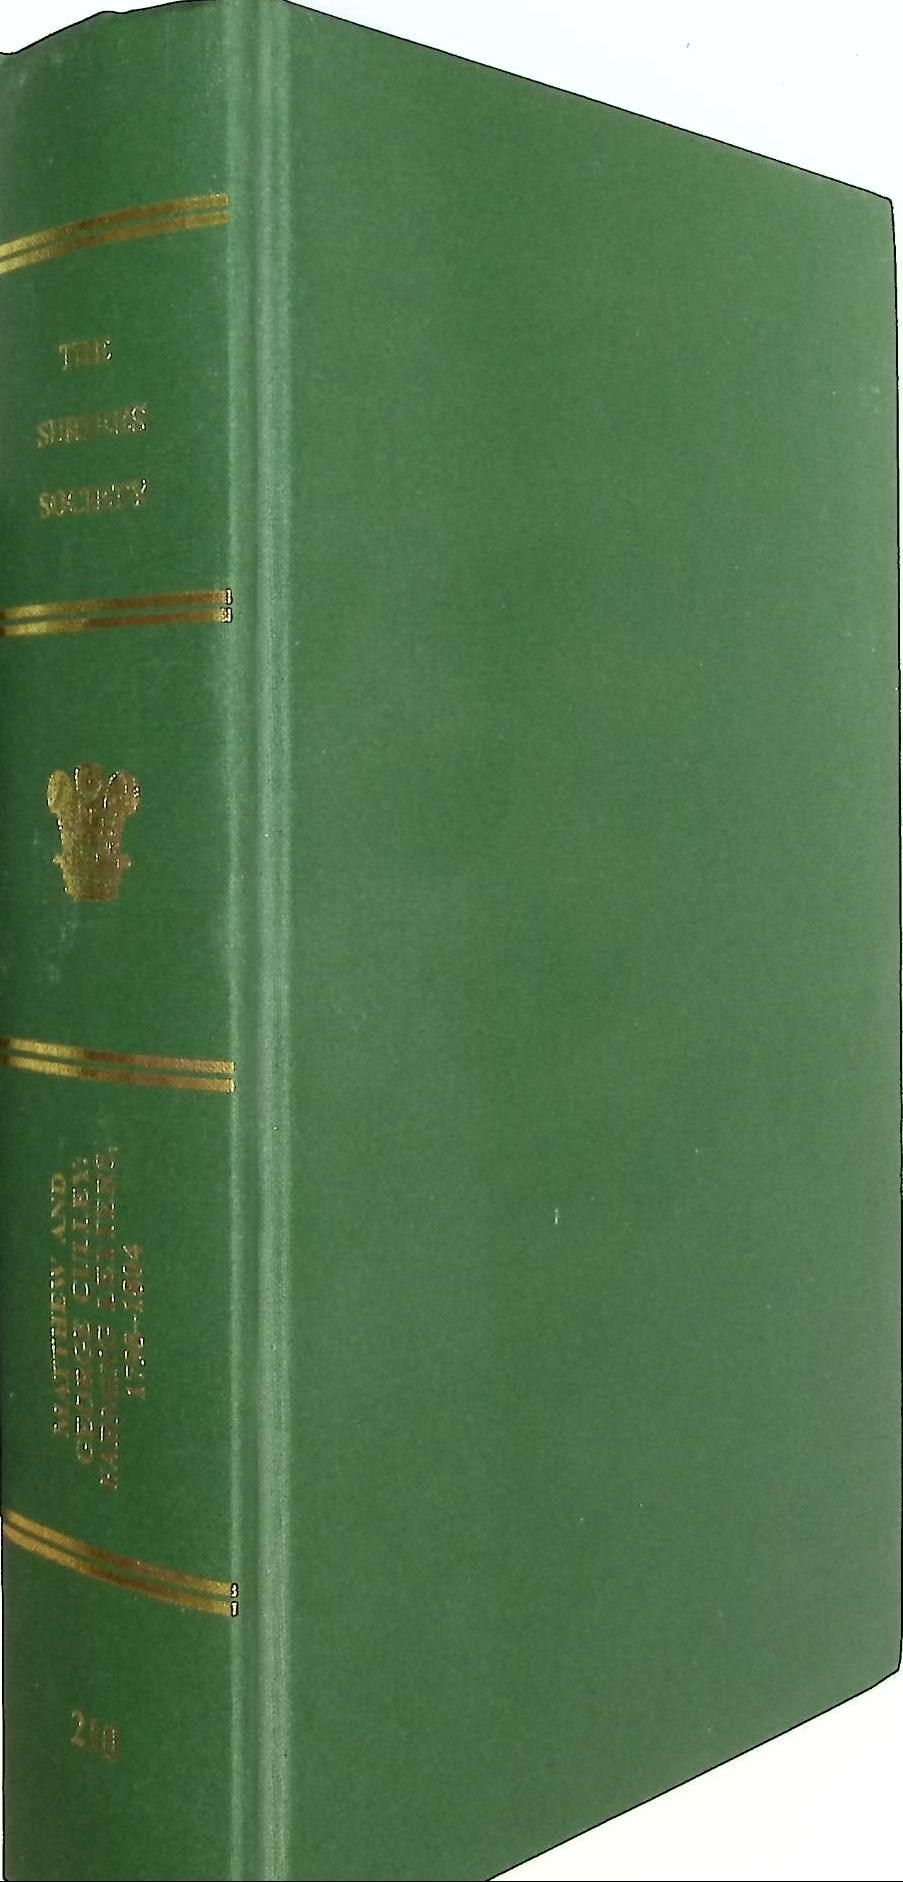 Matthew and George Culley. Farming Letters 1798-1804. The Surtees Society Volume 210